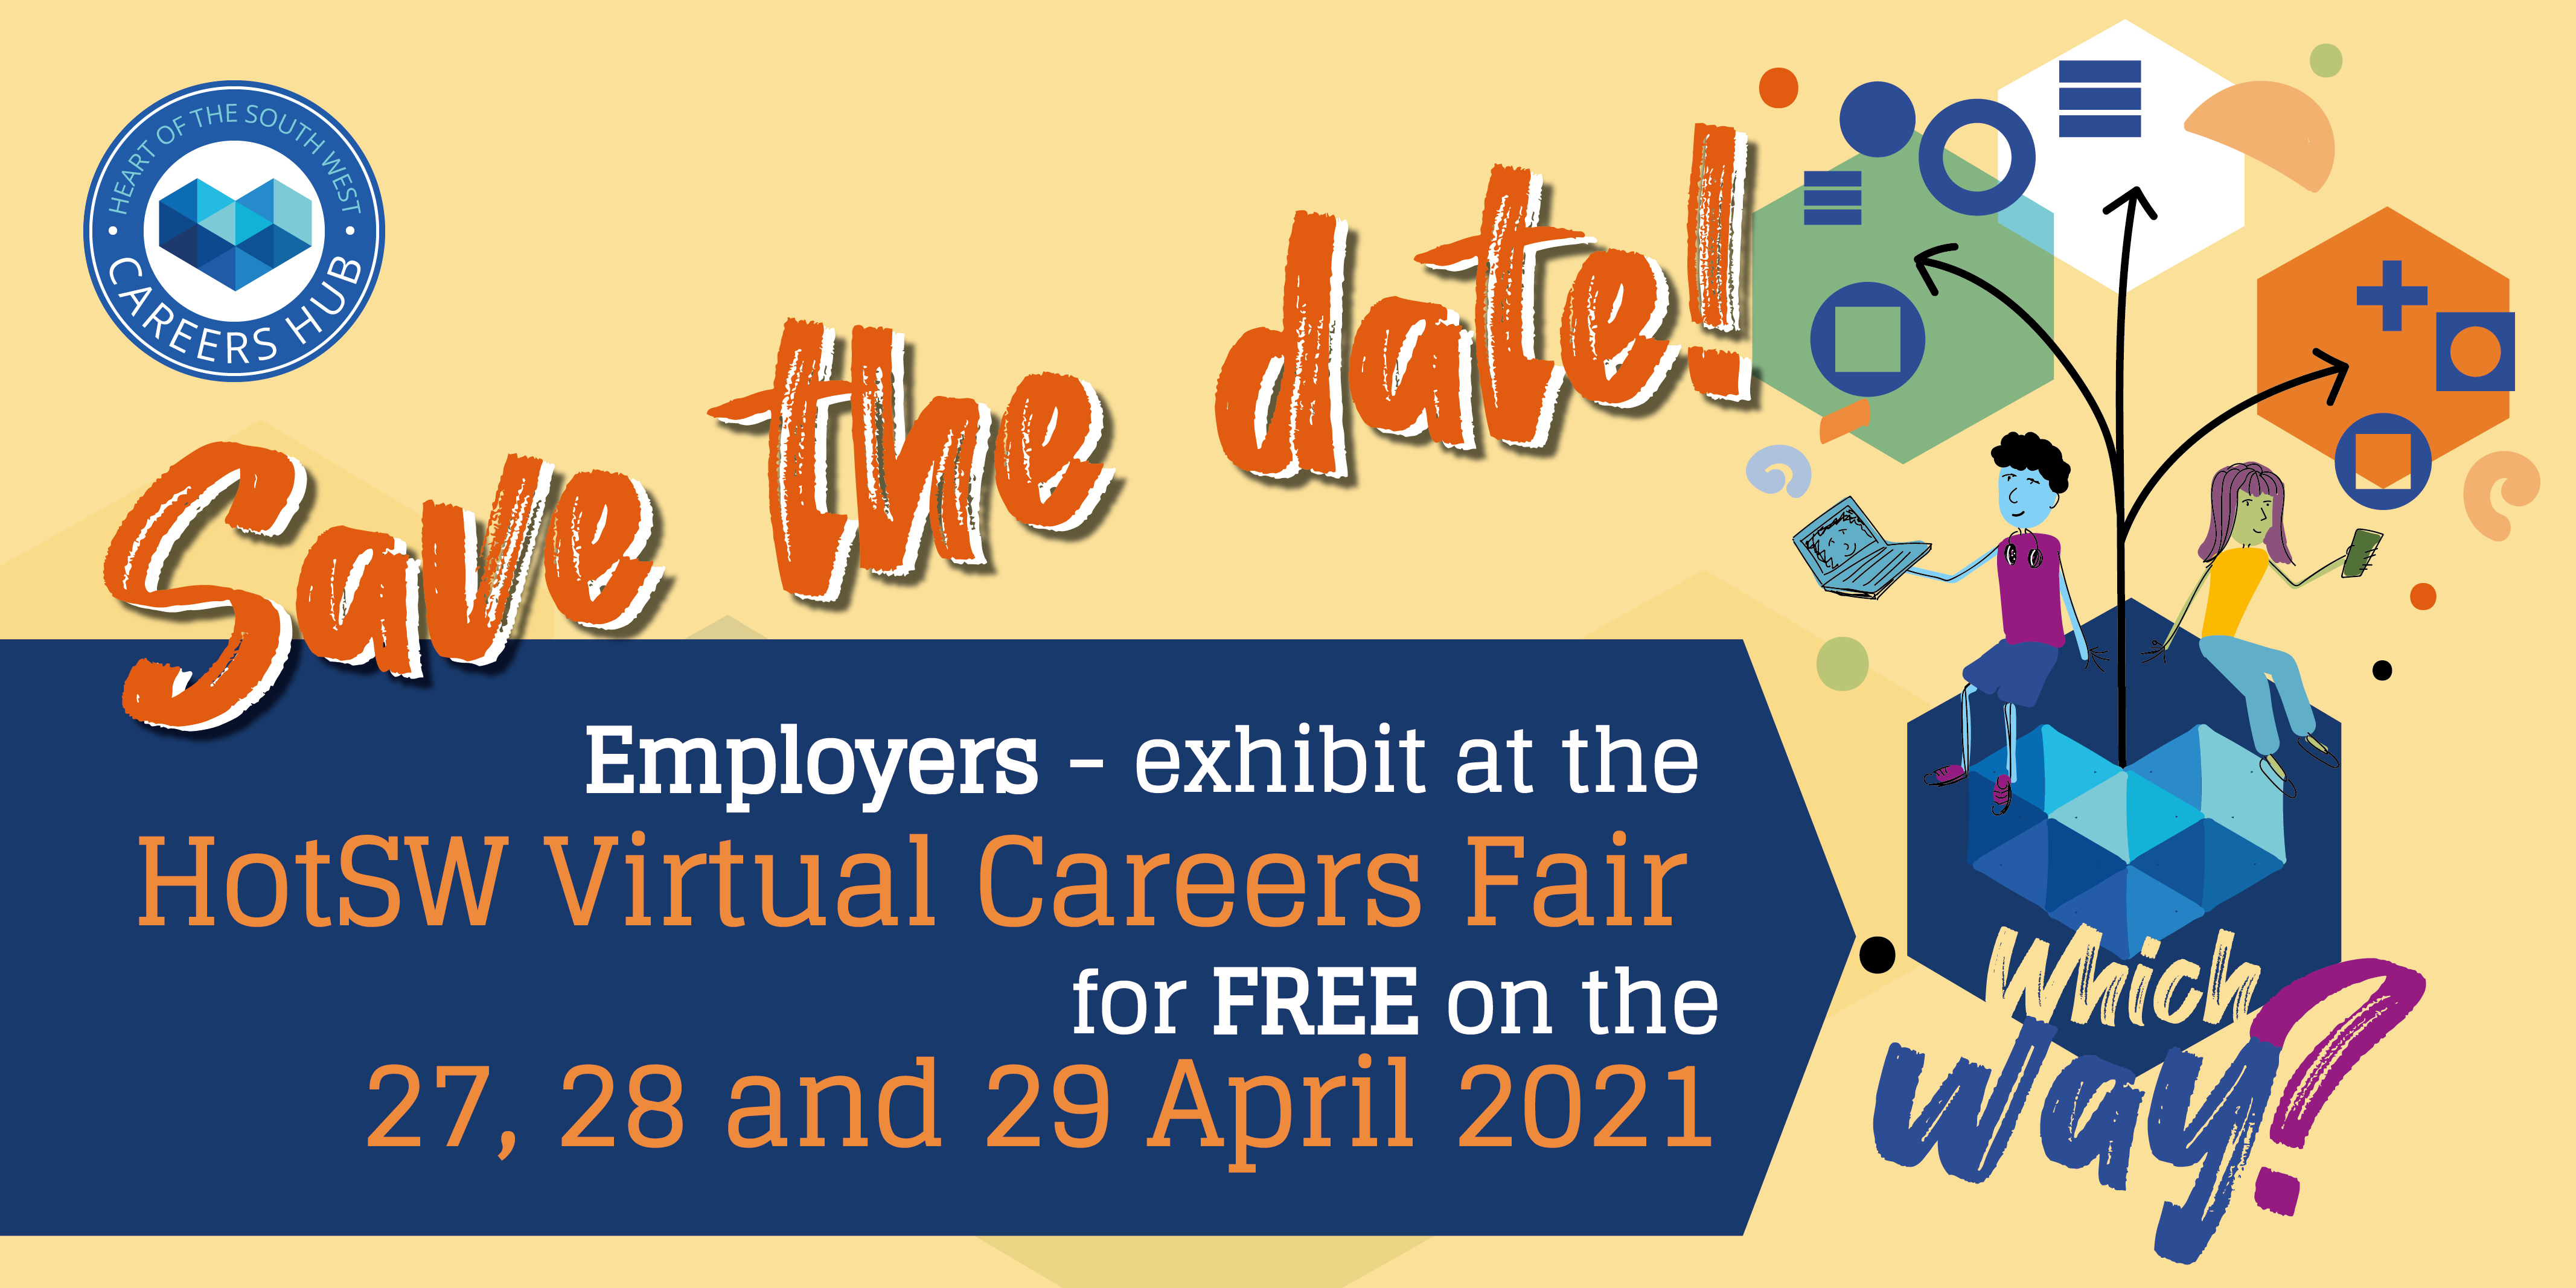 HotSW Careers Hub virtual careers event “Which Way?” is coming ……..!!!